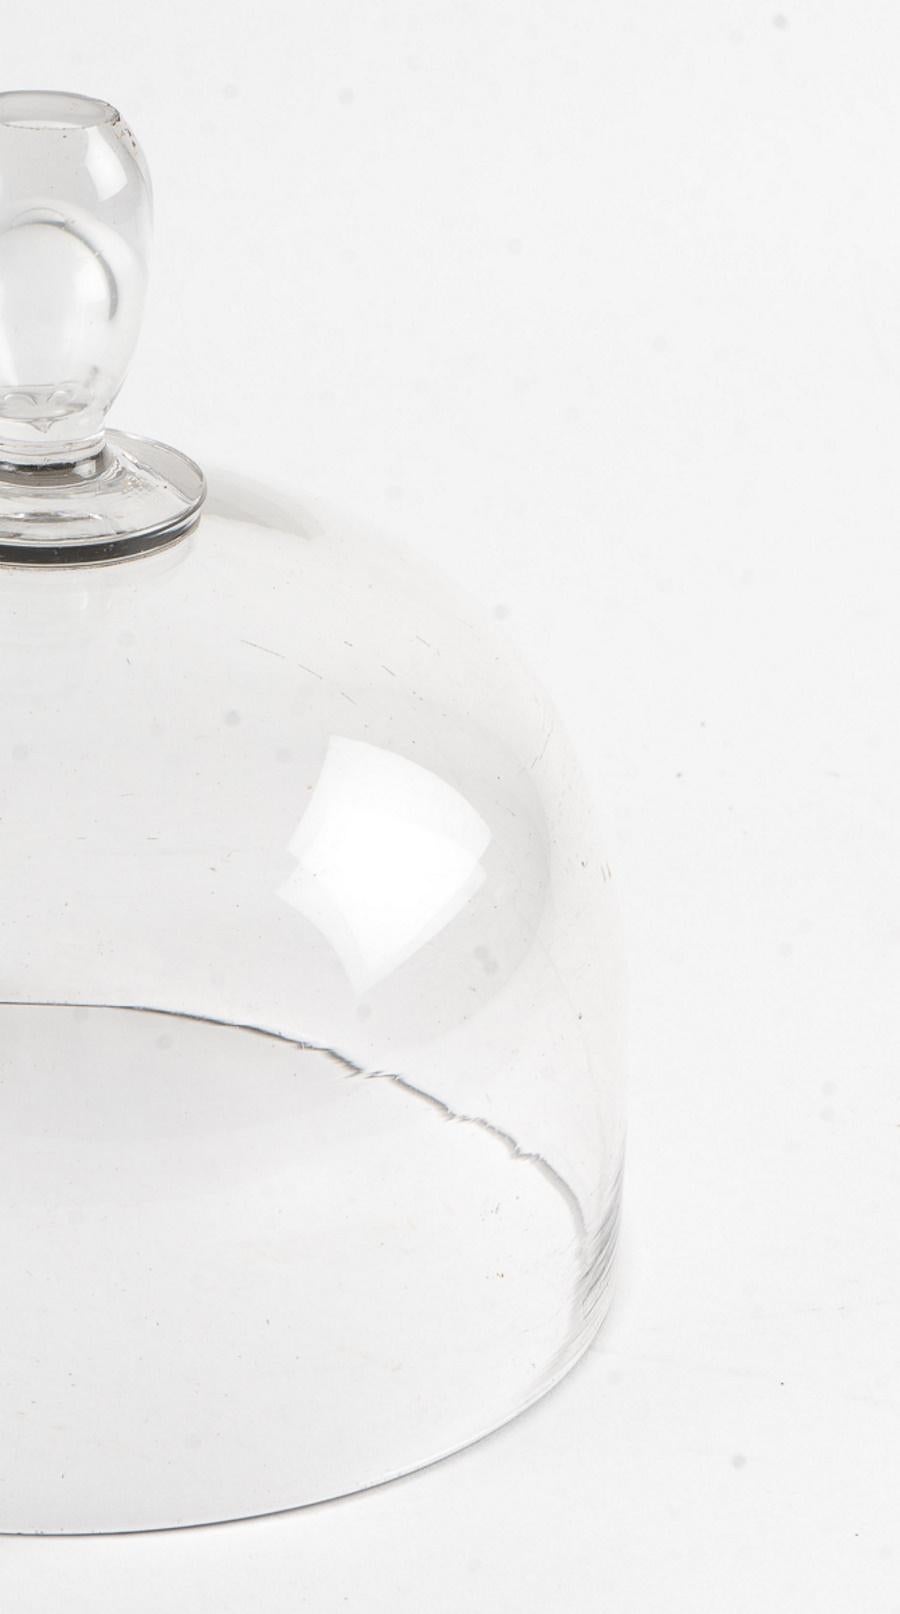 Crystal cloche, early 20th century.
Measures: H: 18 cm, D: 17 cm.